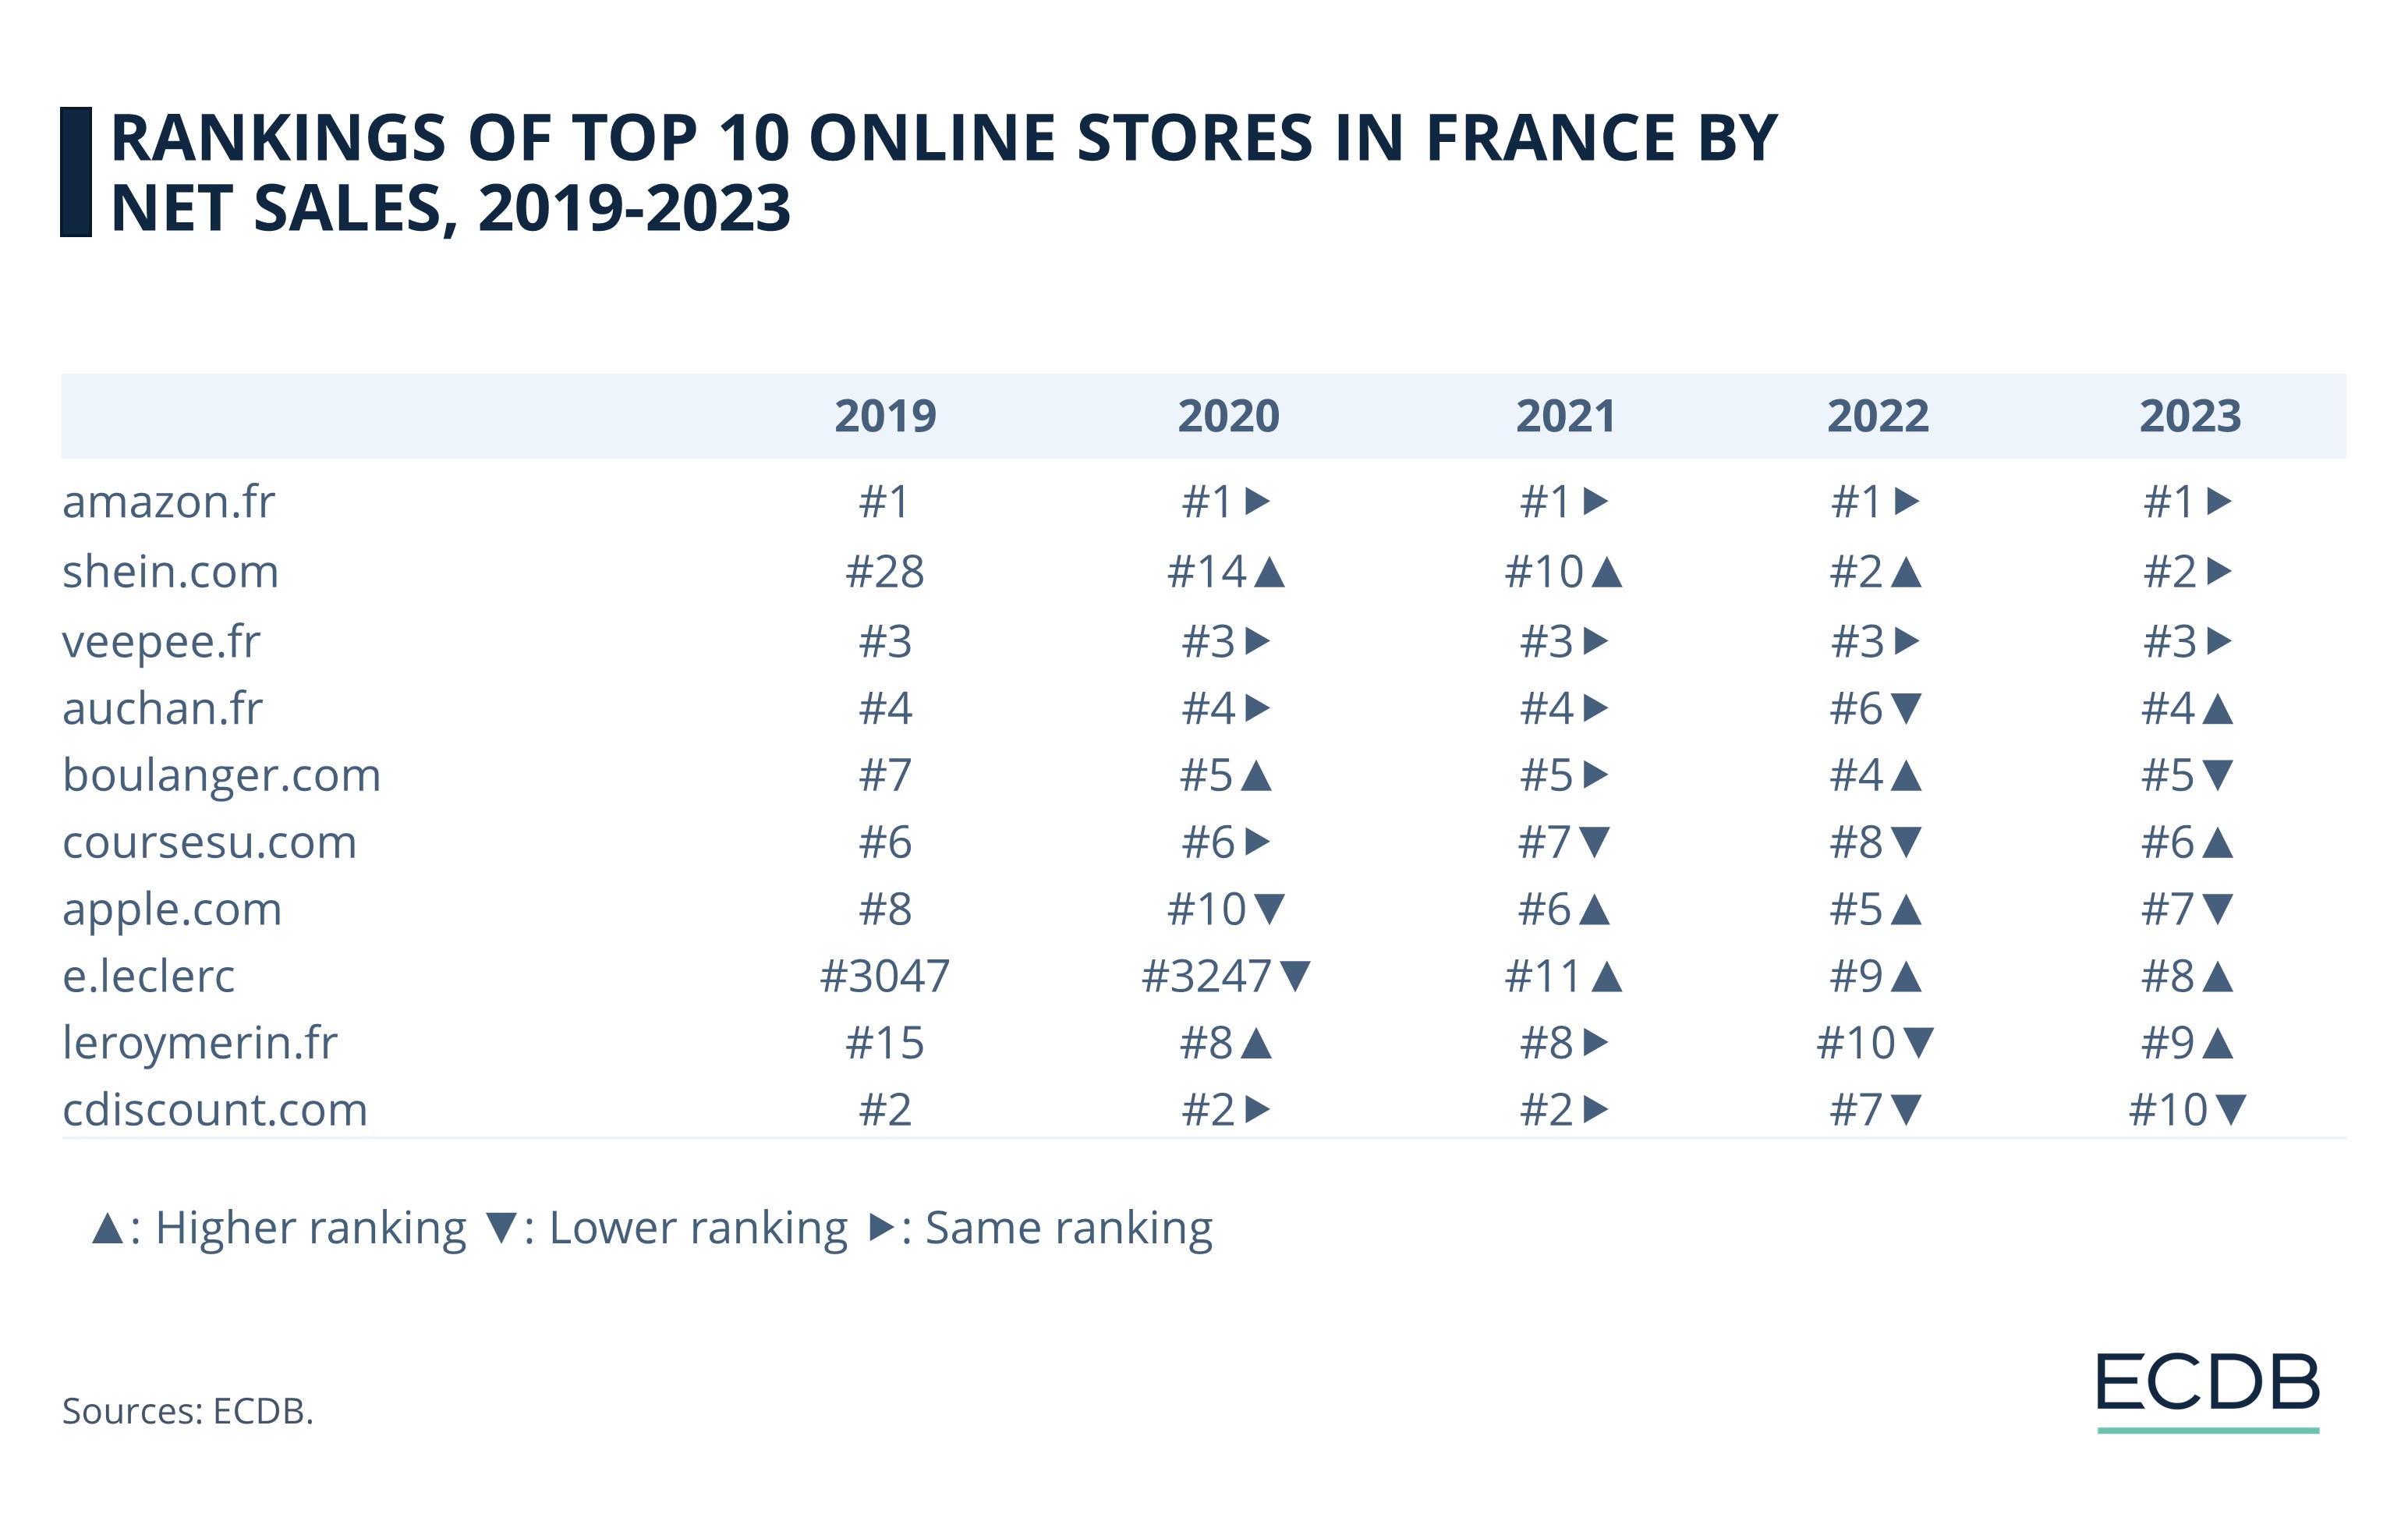 Rankings of Top 10 Online Stores in France by Net Sales, 2018-2022